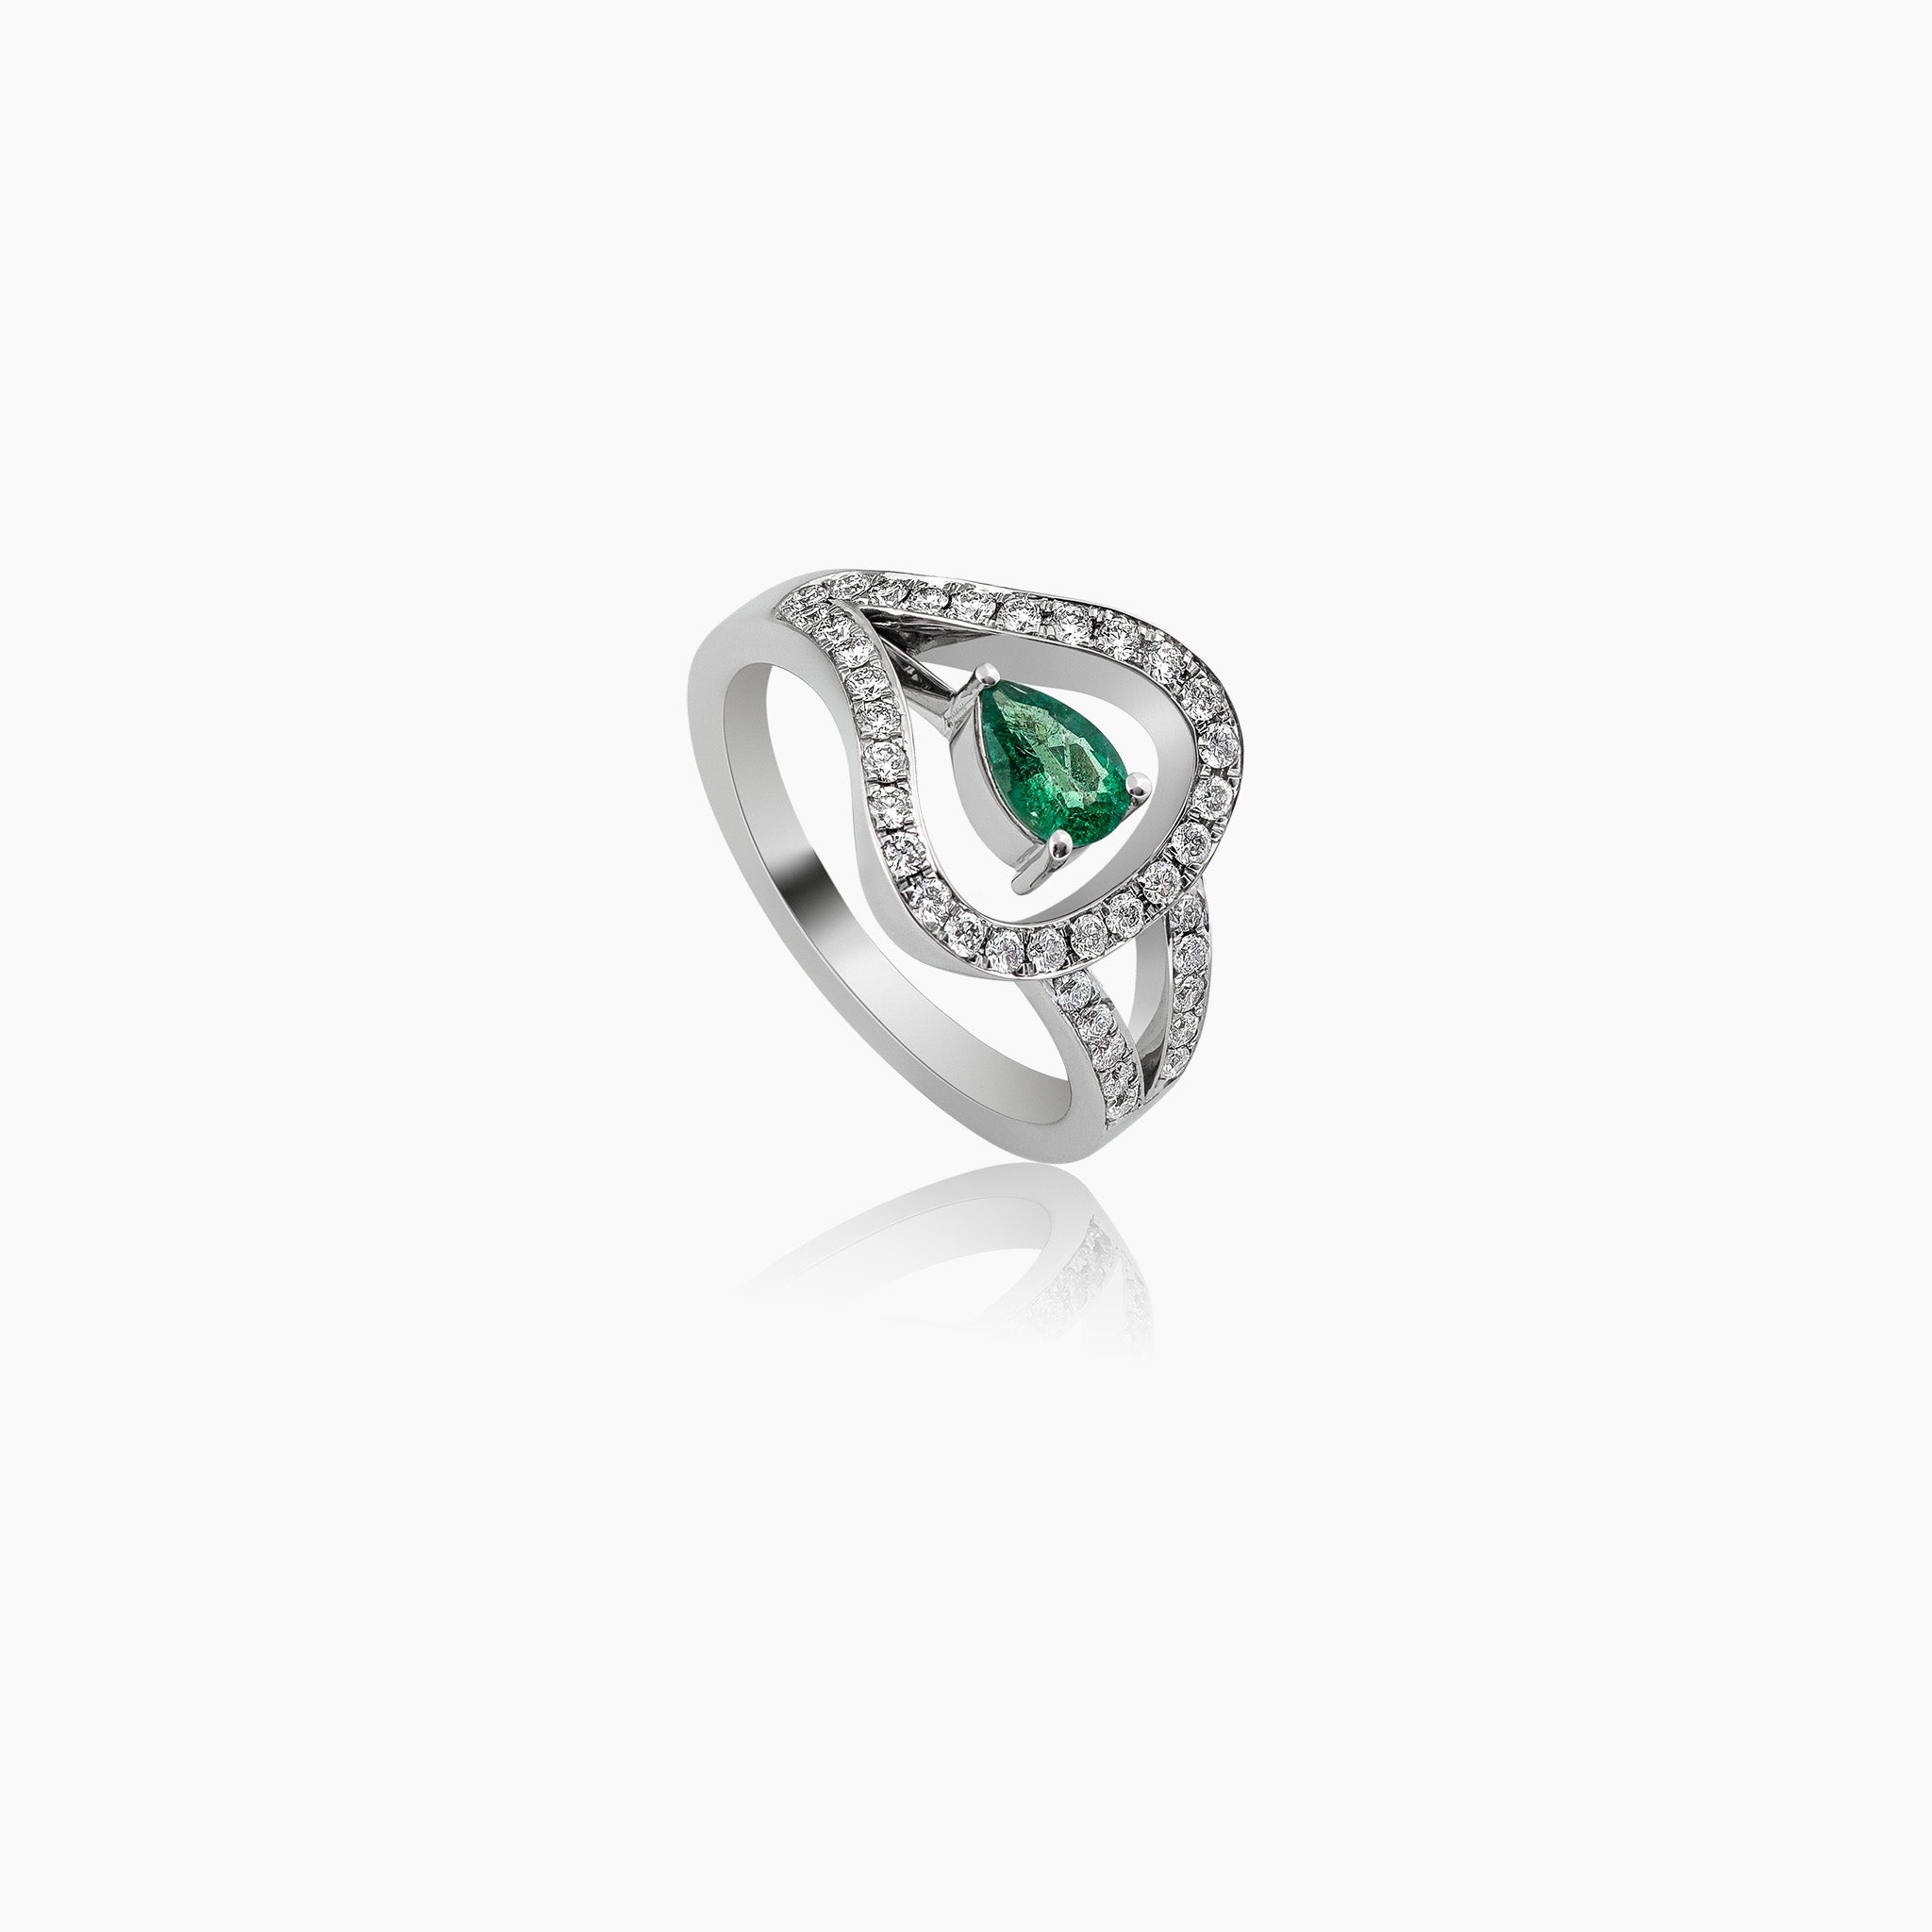 Anagenesis ring: Featuring a stunning Zambian emerald at its center, encircled by glistening diamonds, set in white gold, showcased on an off-white background.